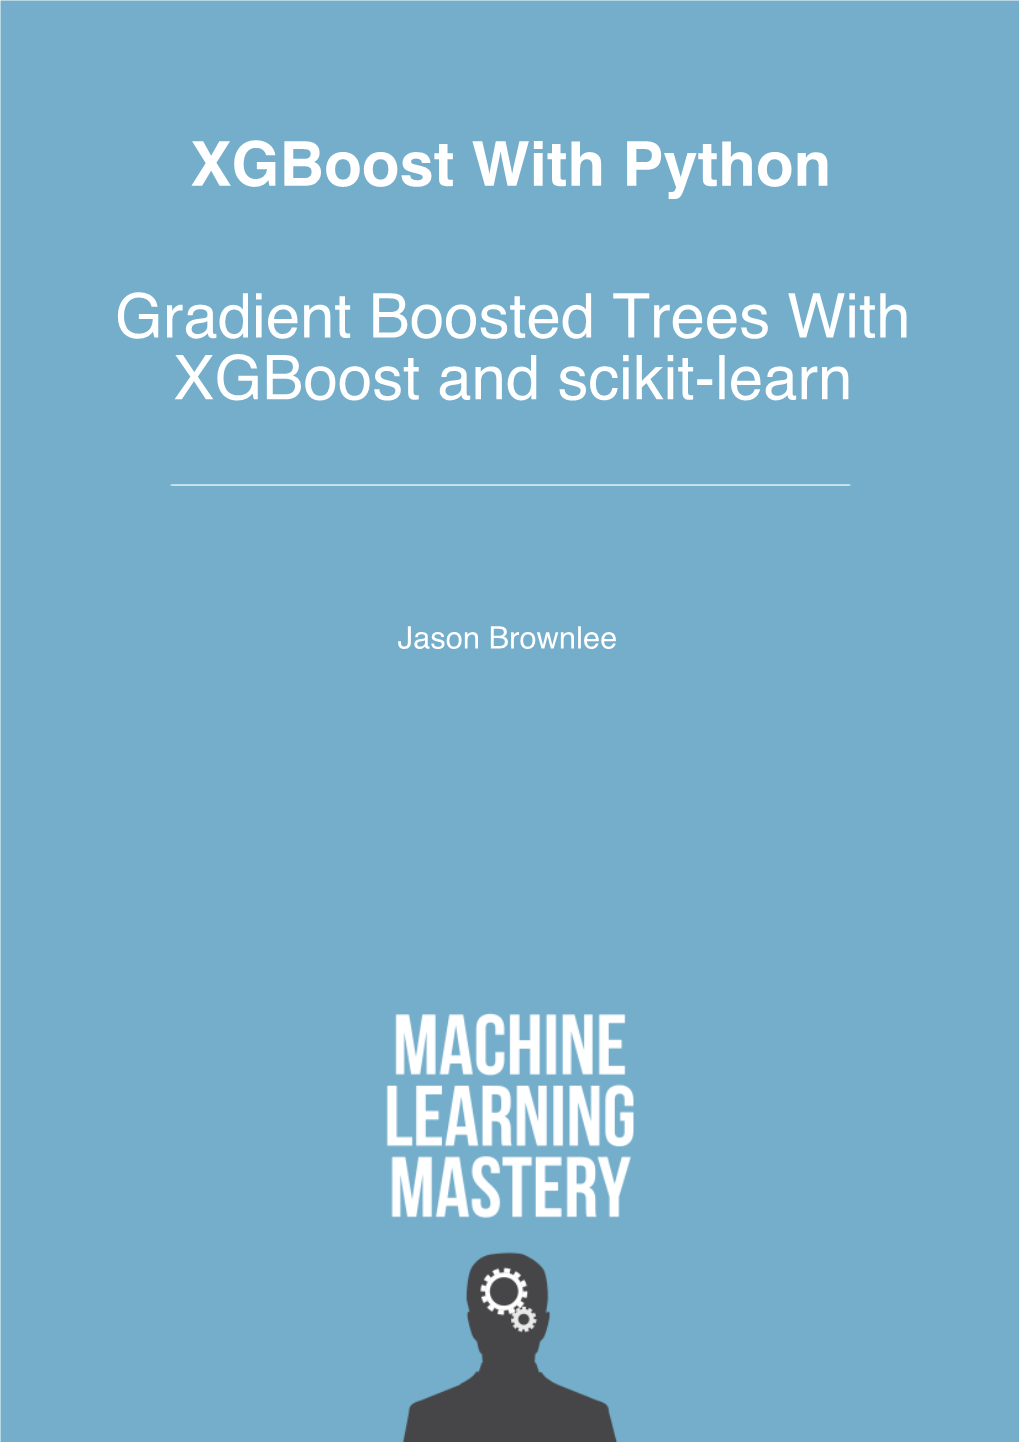 Xgboost with Python Gradient Boosted Trees with Xgboost and Scikit Learn